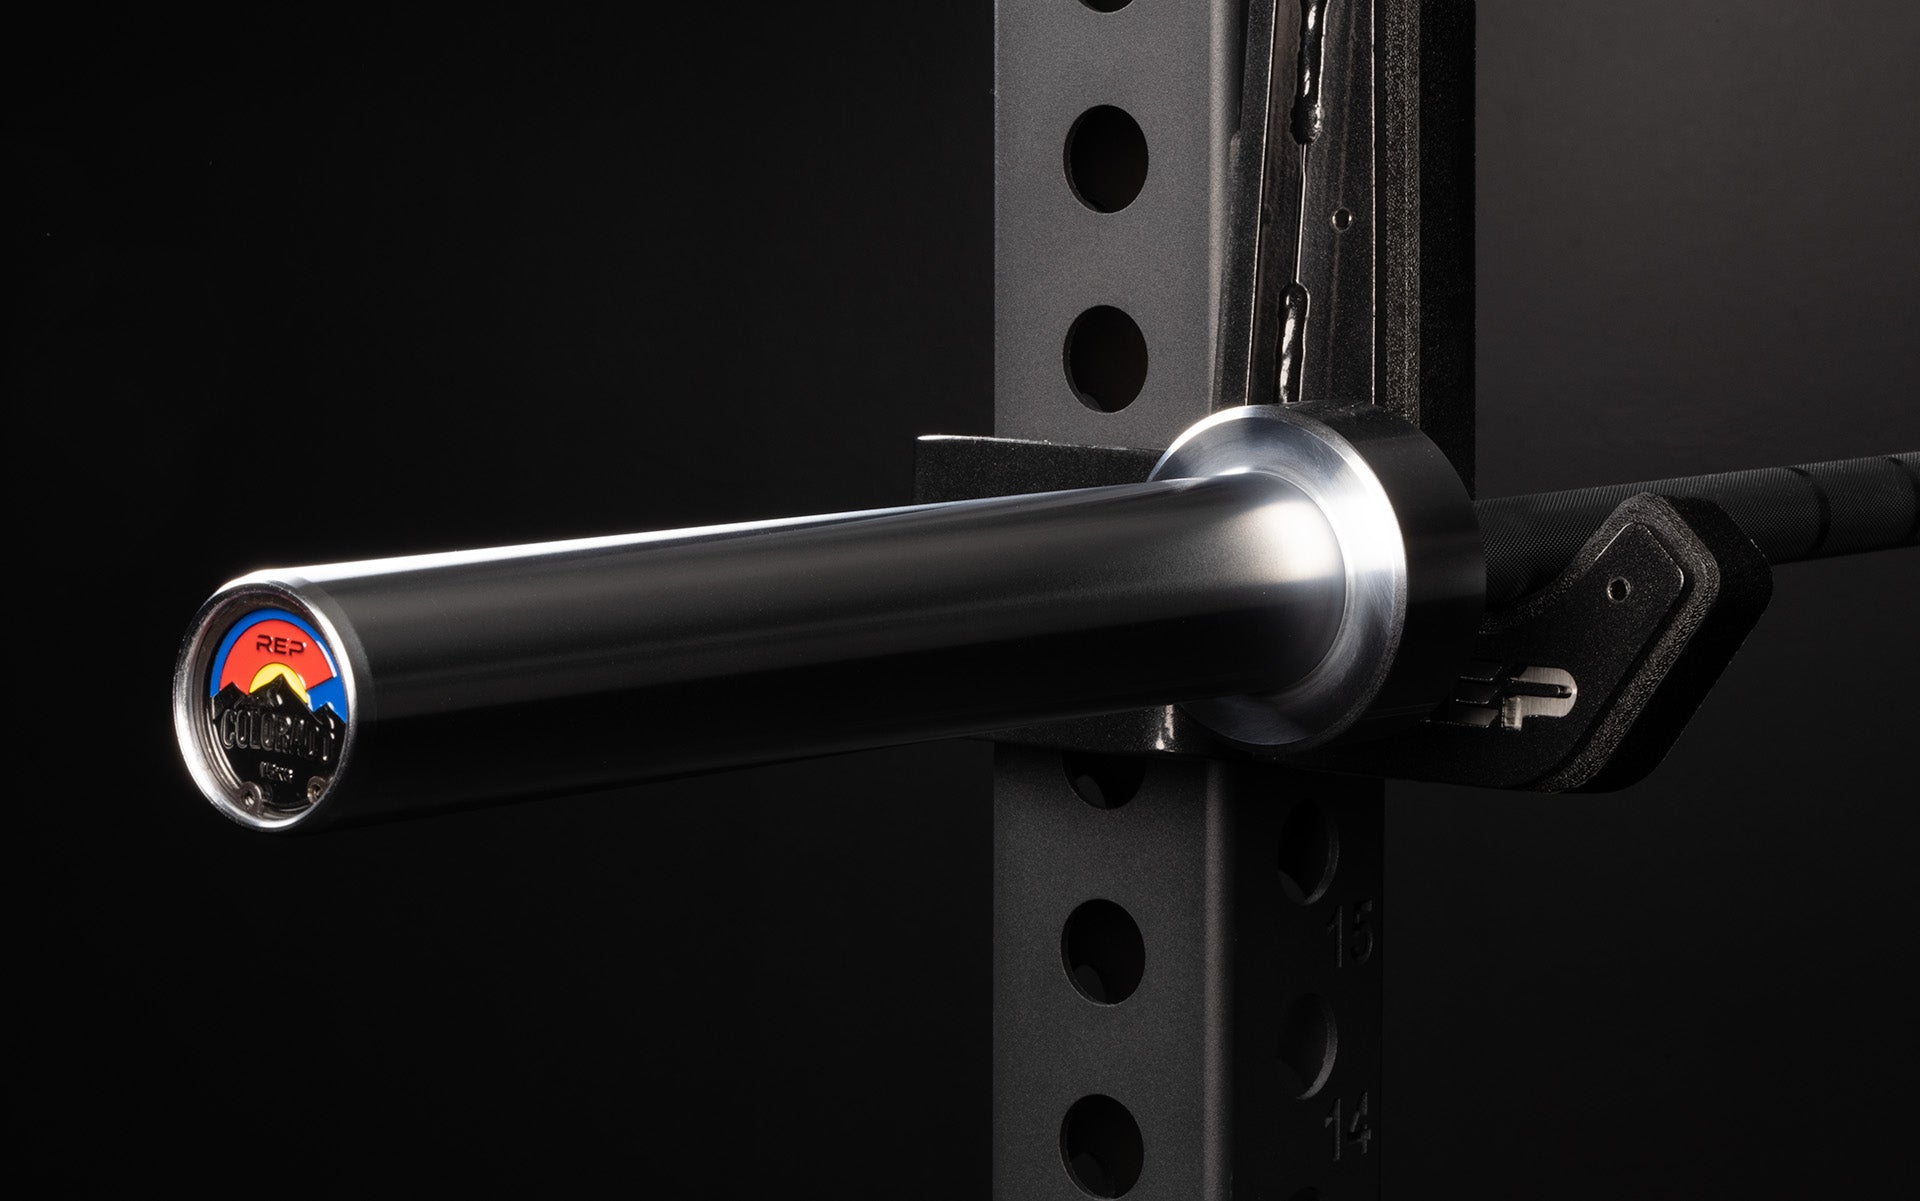 Close-up view of the sleeve and premium endcap of a racked REP 15kg Colorado Bar.